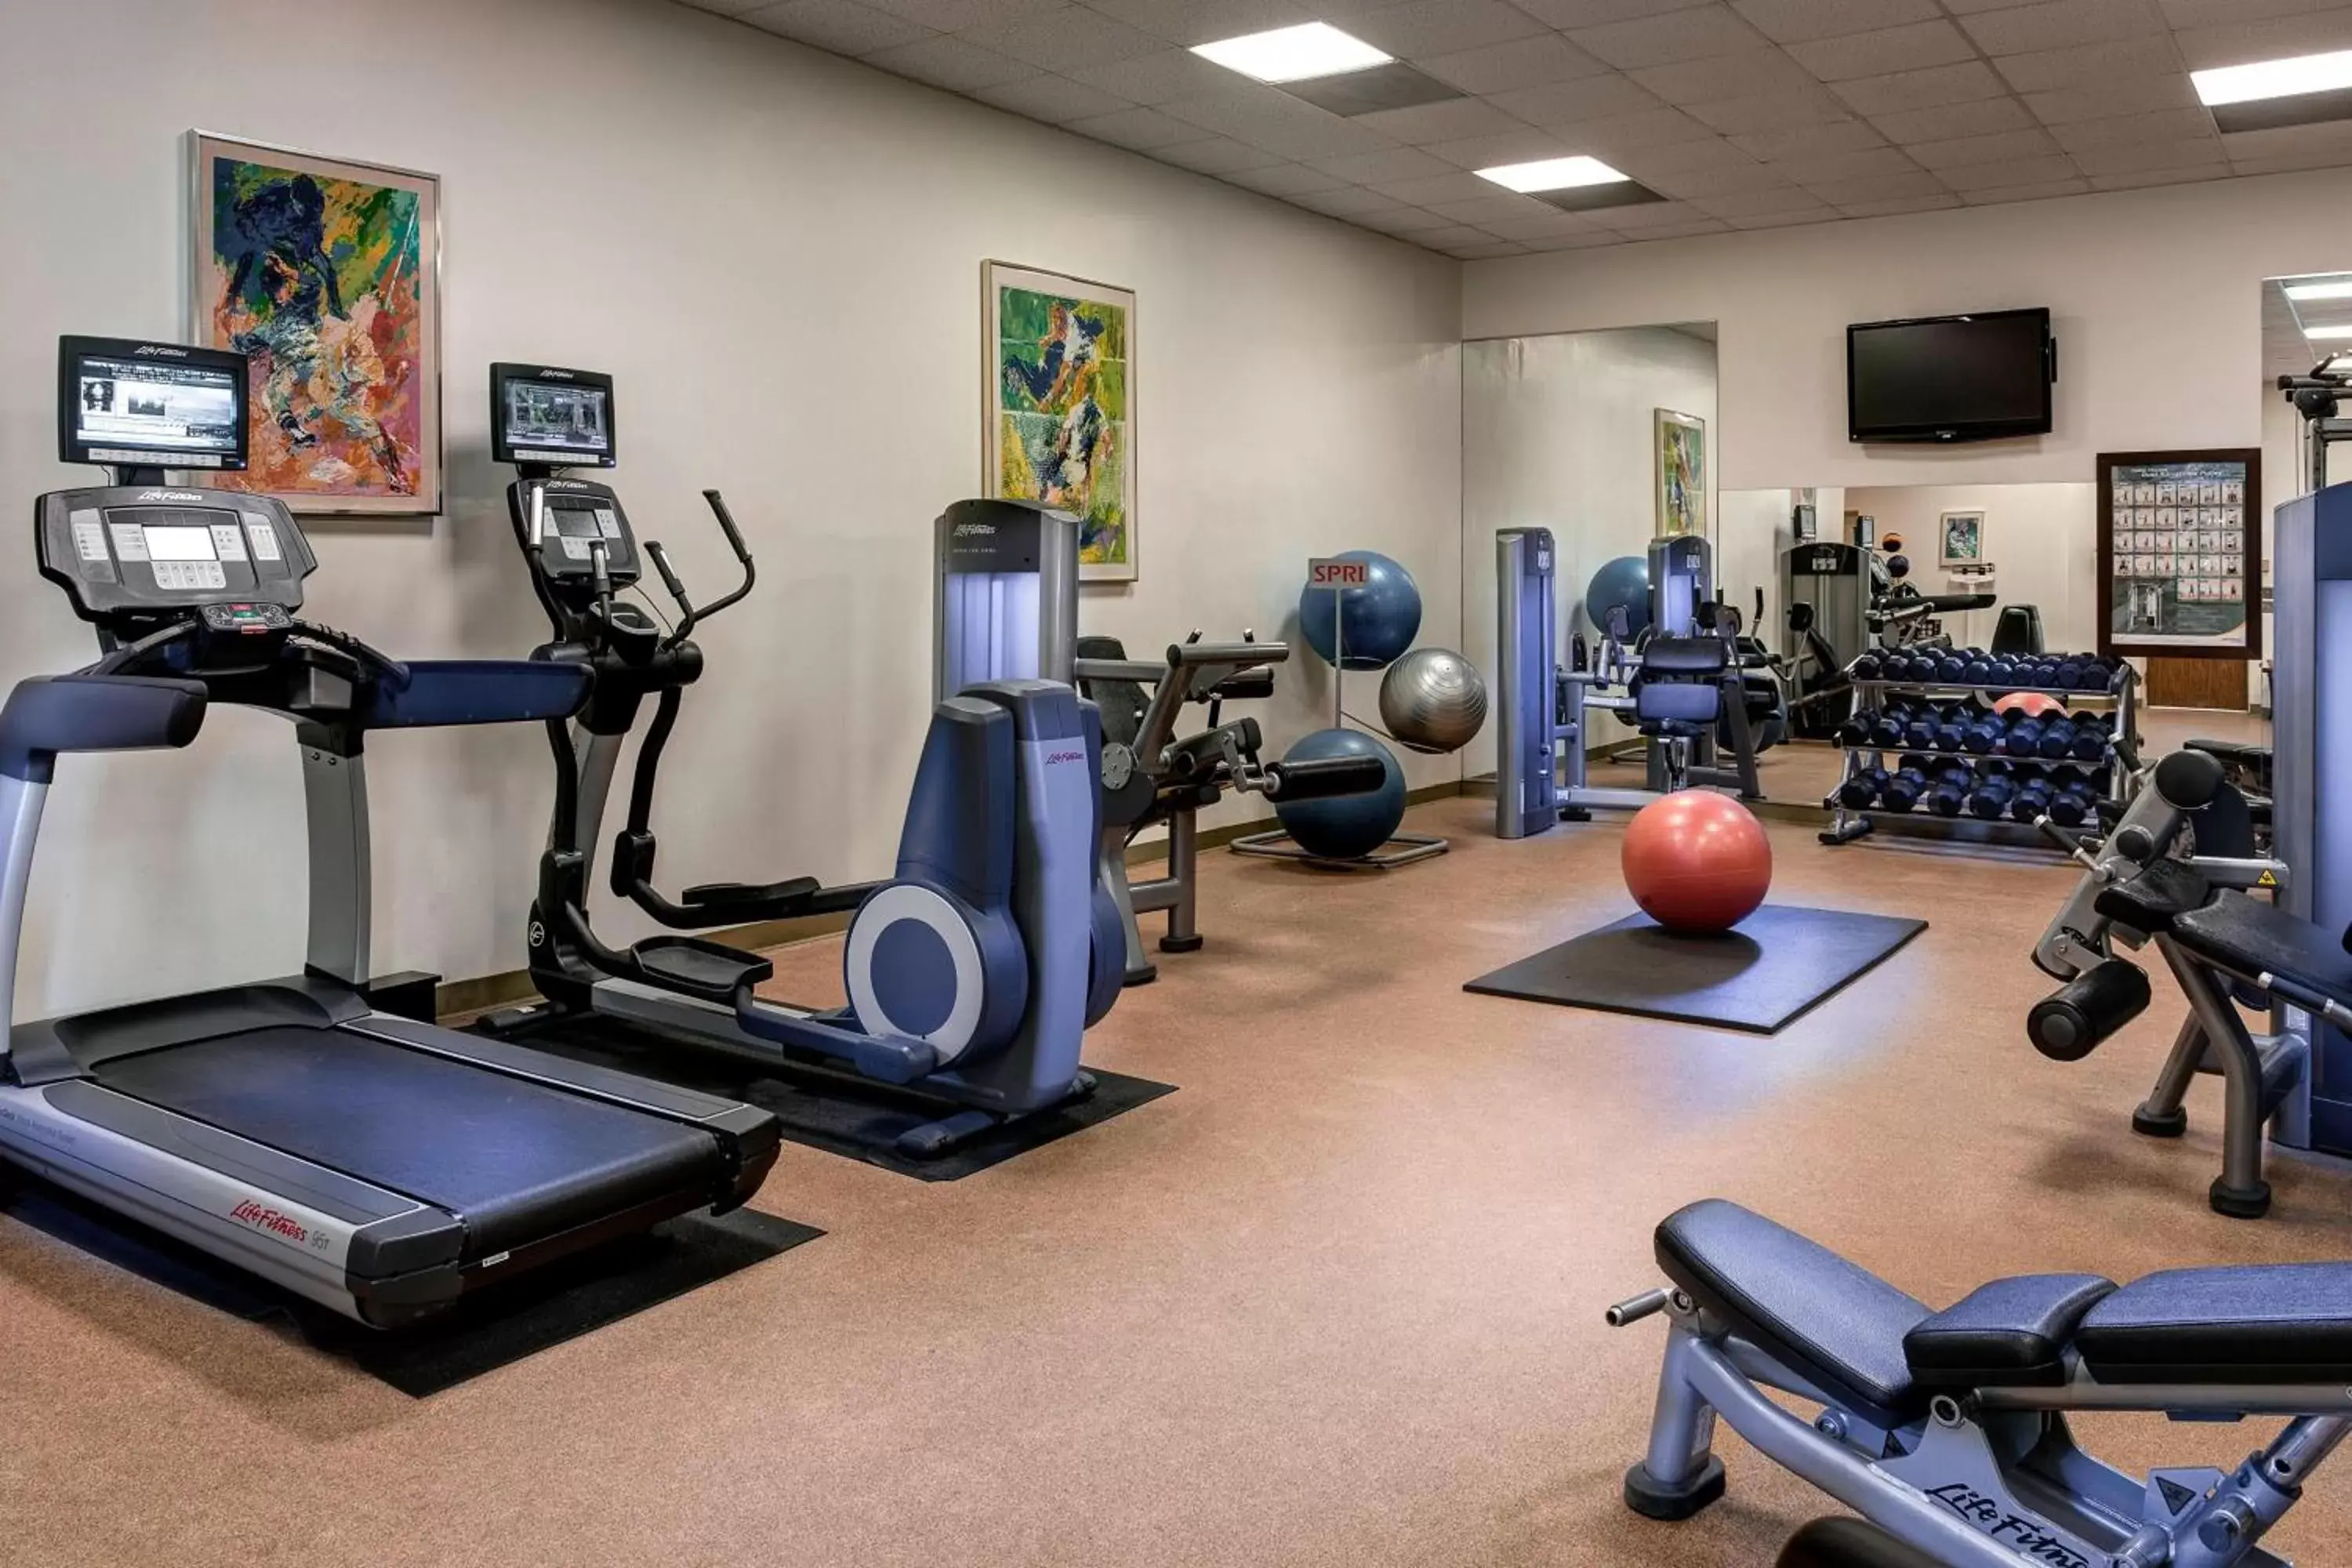 Fitness centre/facilities, Fitness Center/Facilities in Houston Marriott Westchase